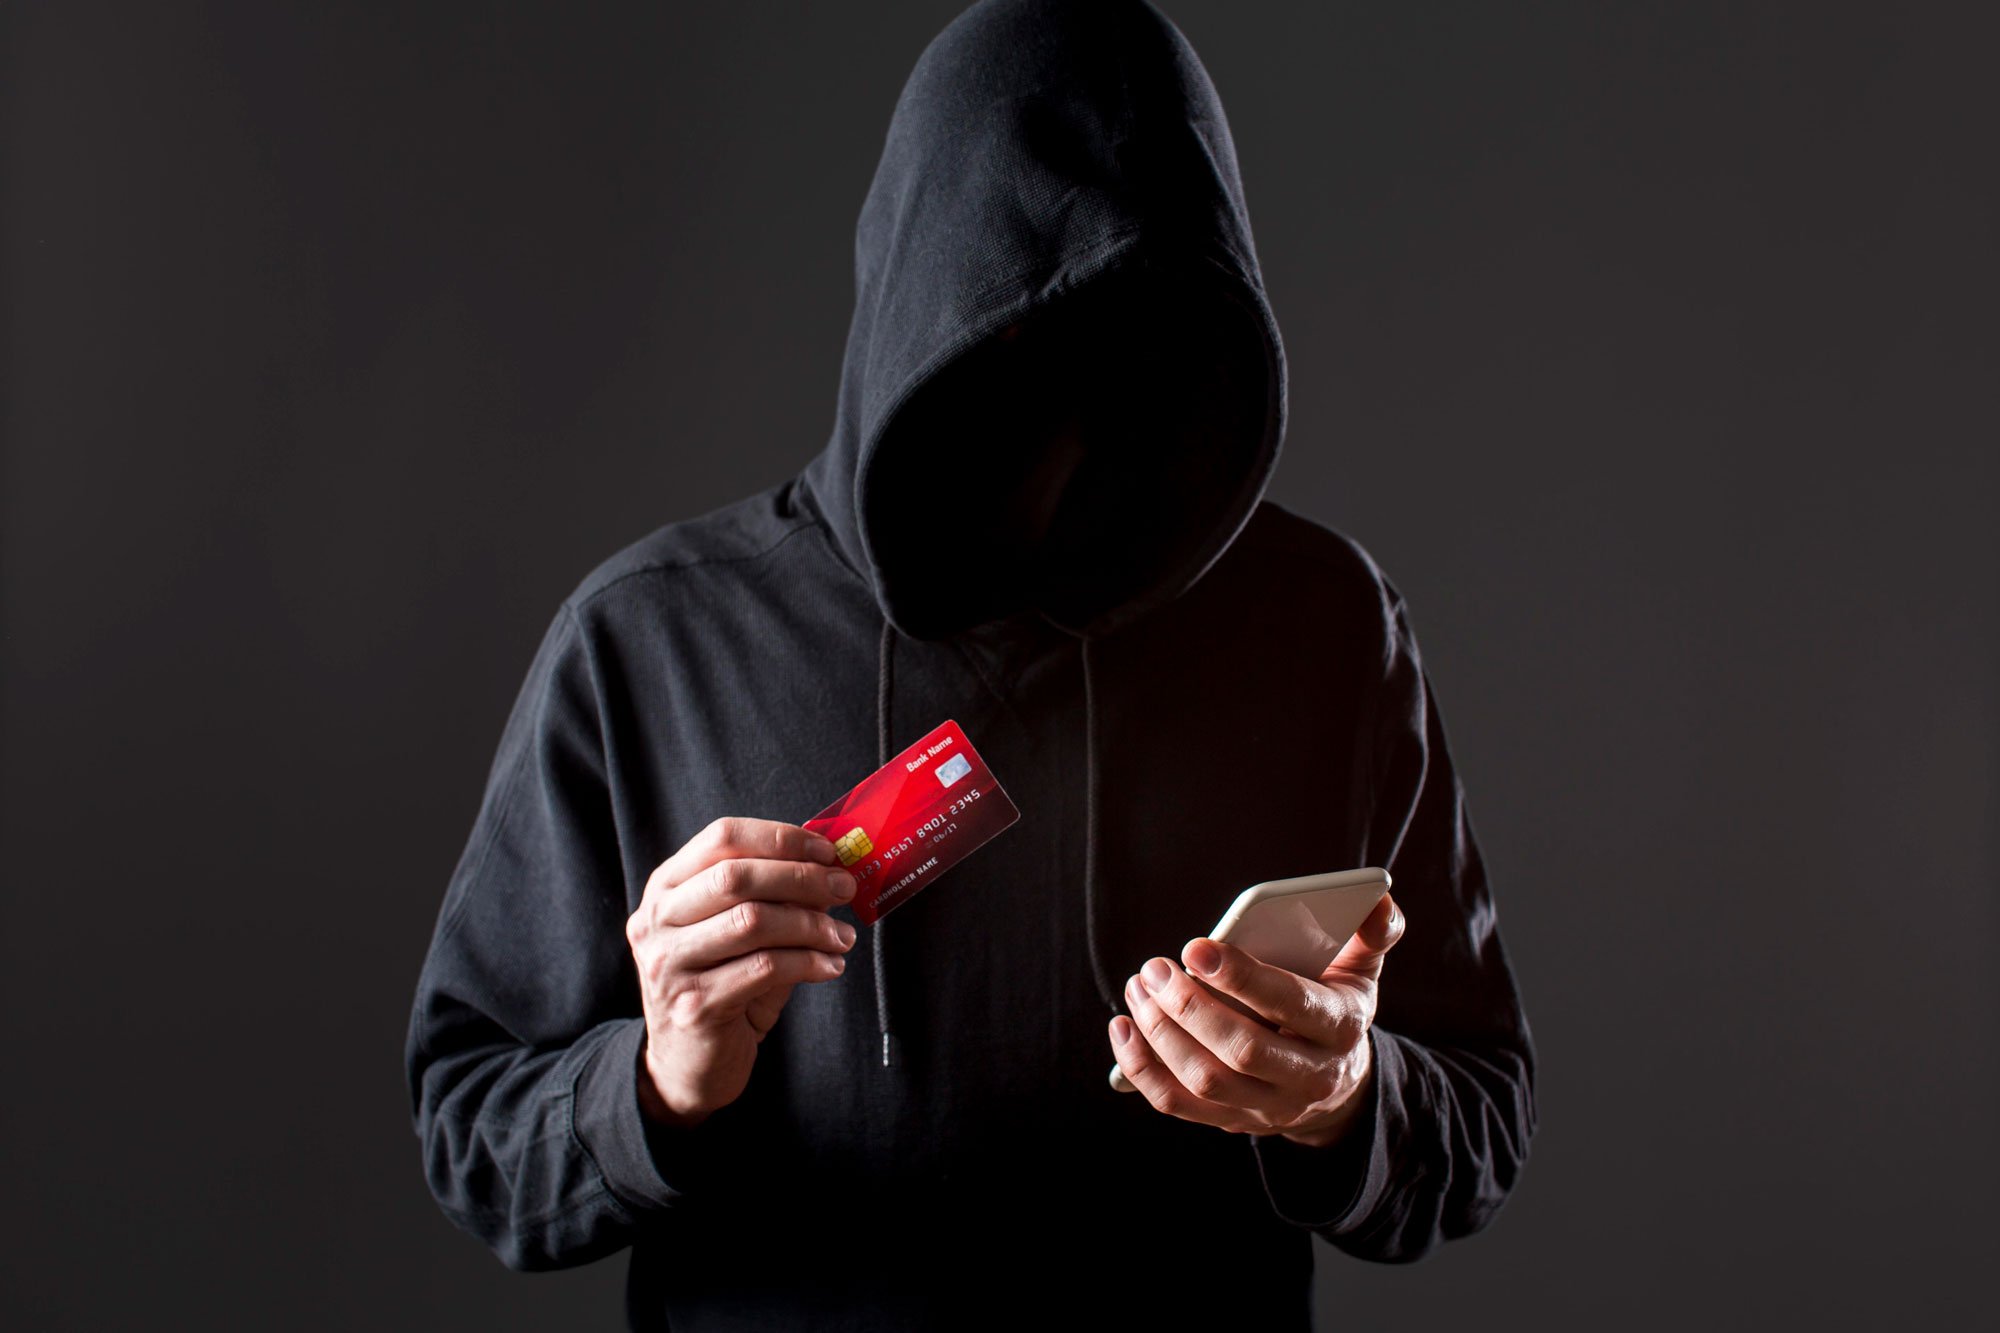 web.front-view-of-male-hacker-holding-smartphone-and-credit-card_0